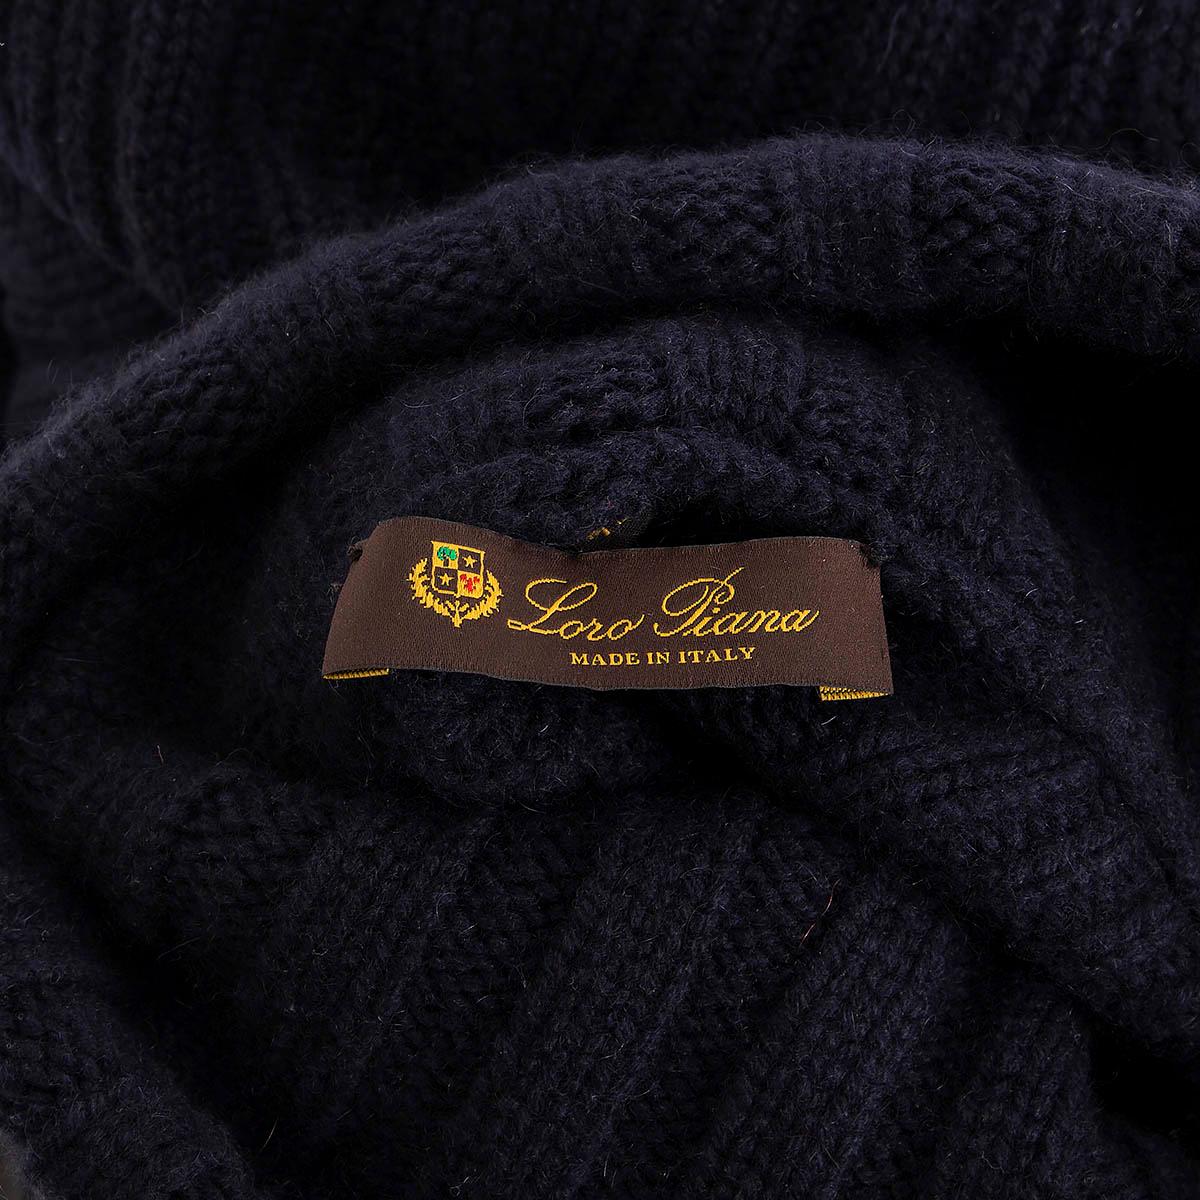 LORO PIANA navy blue cashmere CABLE KNIT TURTLENECK PONCHO Sweater 42 M For Sale 1